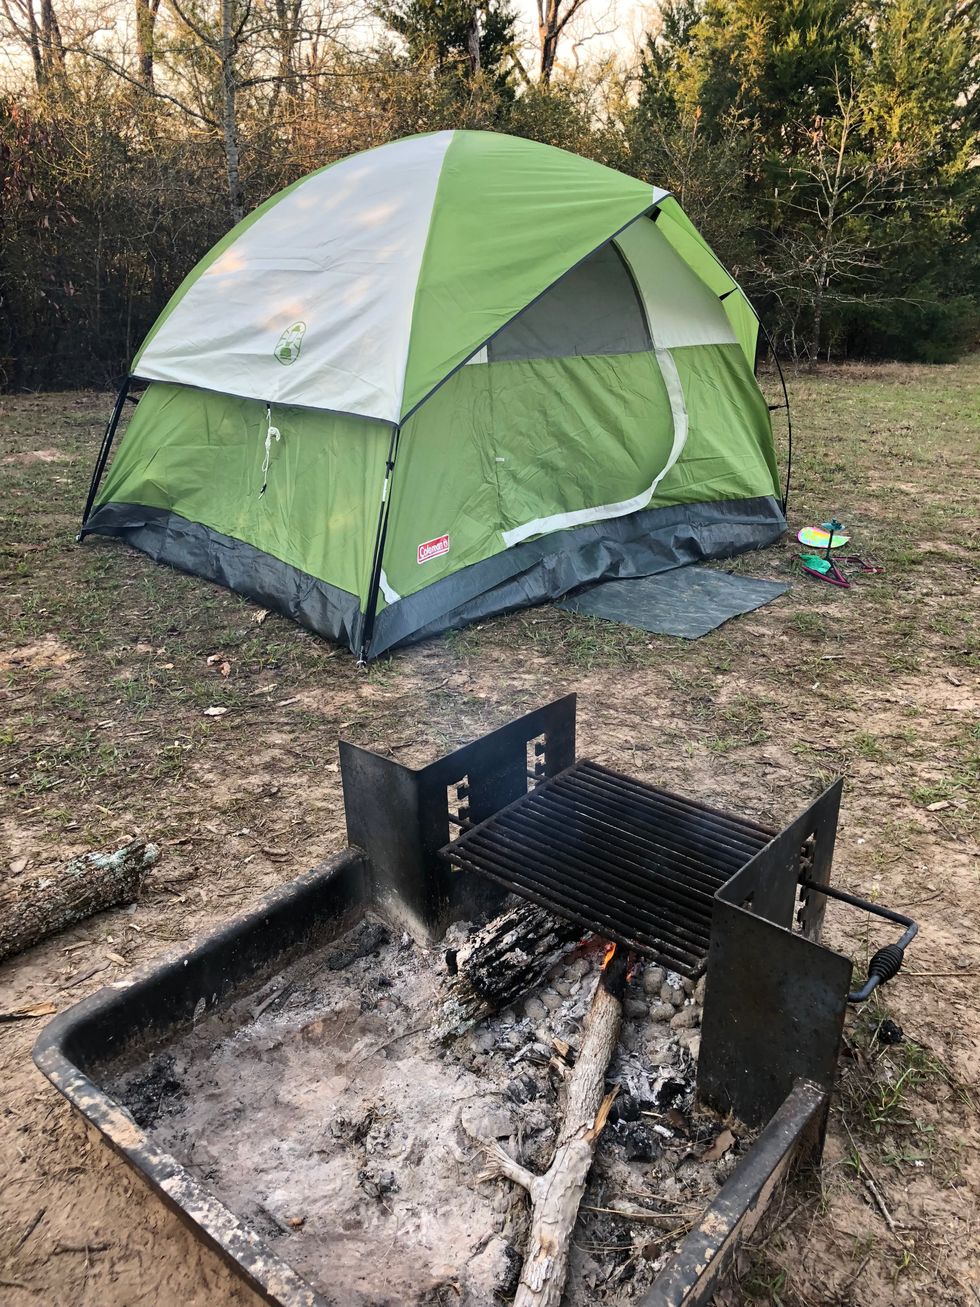 Camping for spring break: A fun two days for the family at Fort Boggy State Park